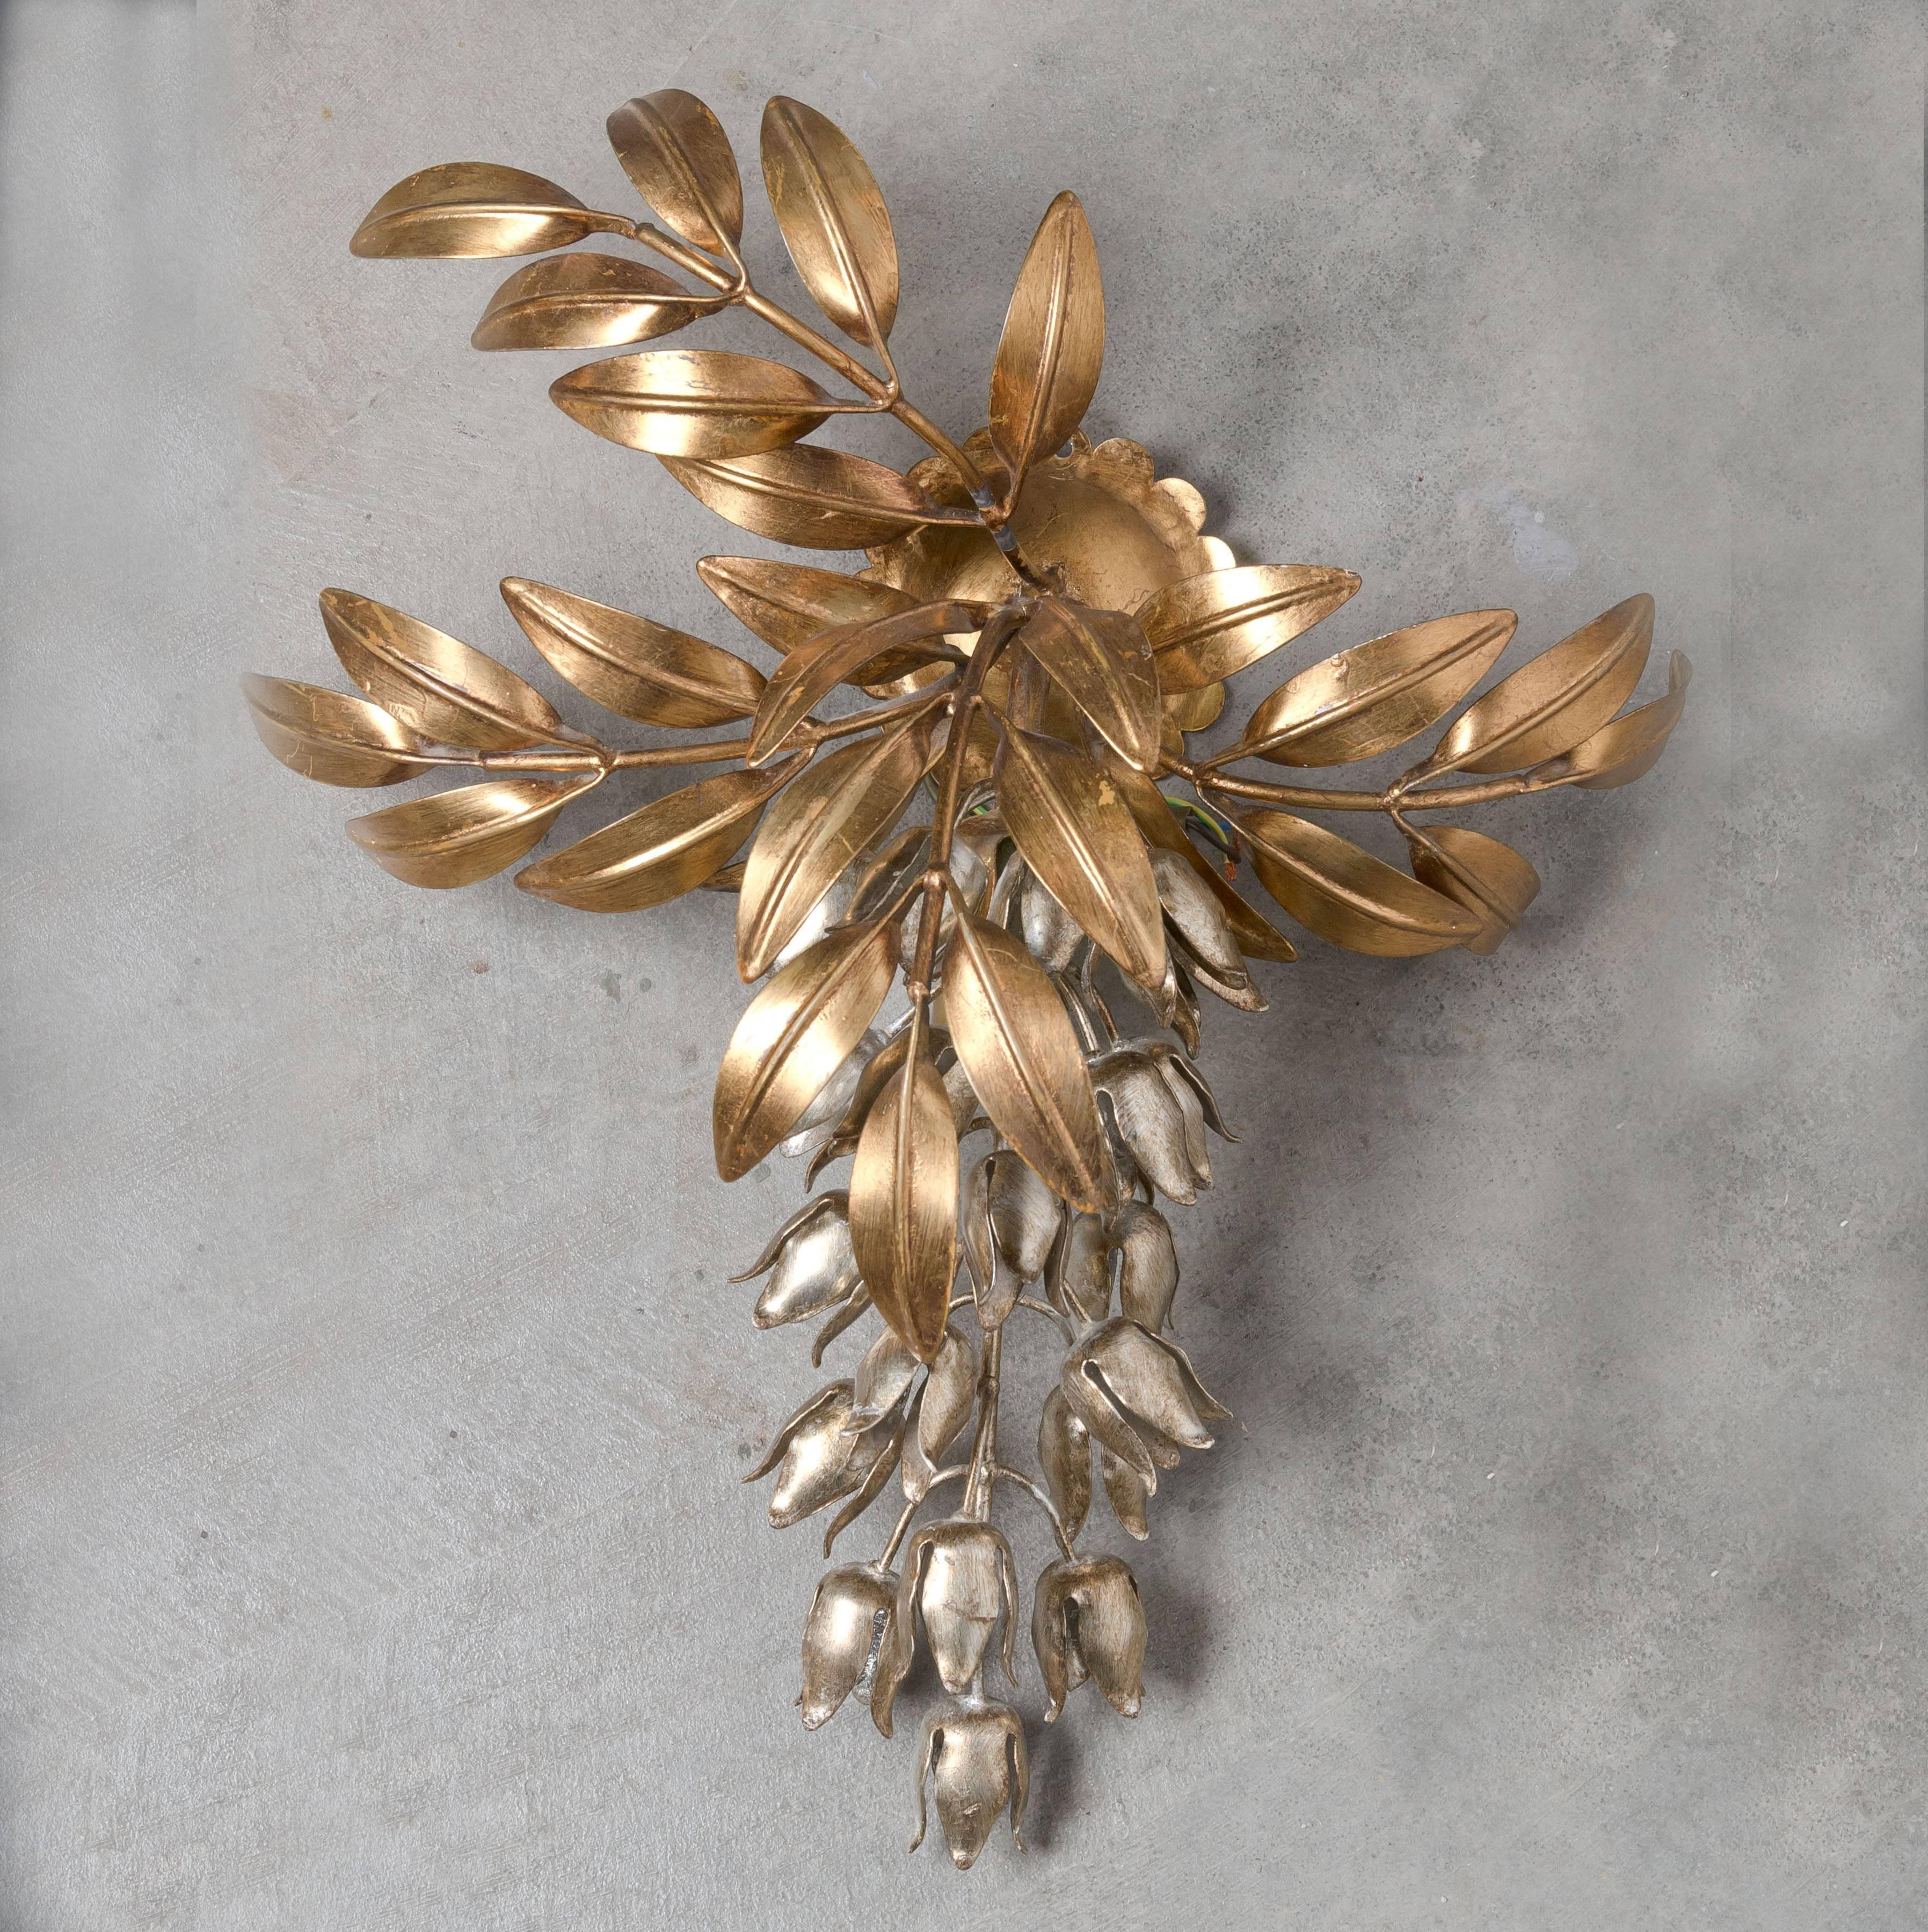 German One of the Two Hans Kögl Gilt Metal Palm Tree Wall Light Sconces, 1960s